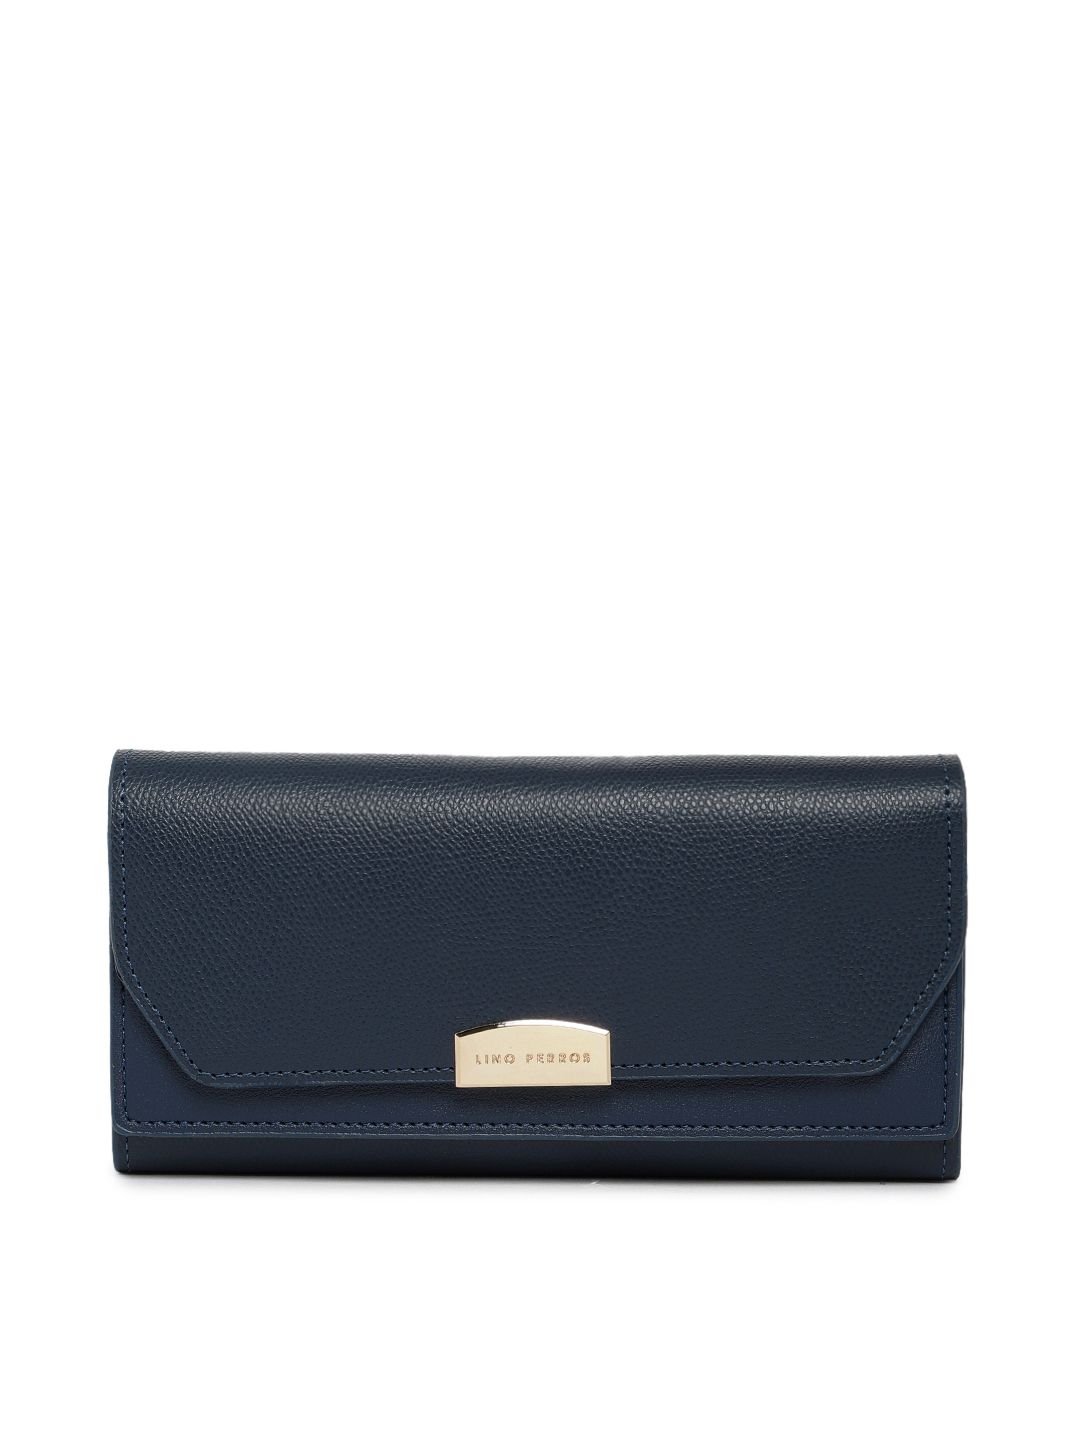 Lino Perros Women Blue Solid Three Fold Wallet Price in India